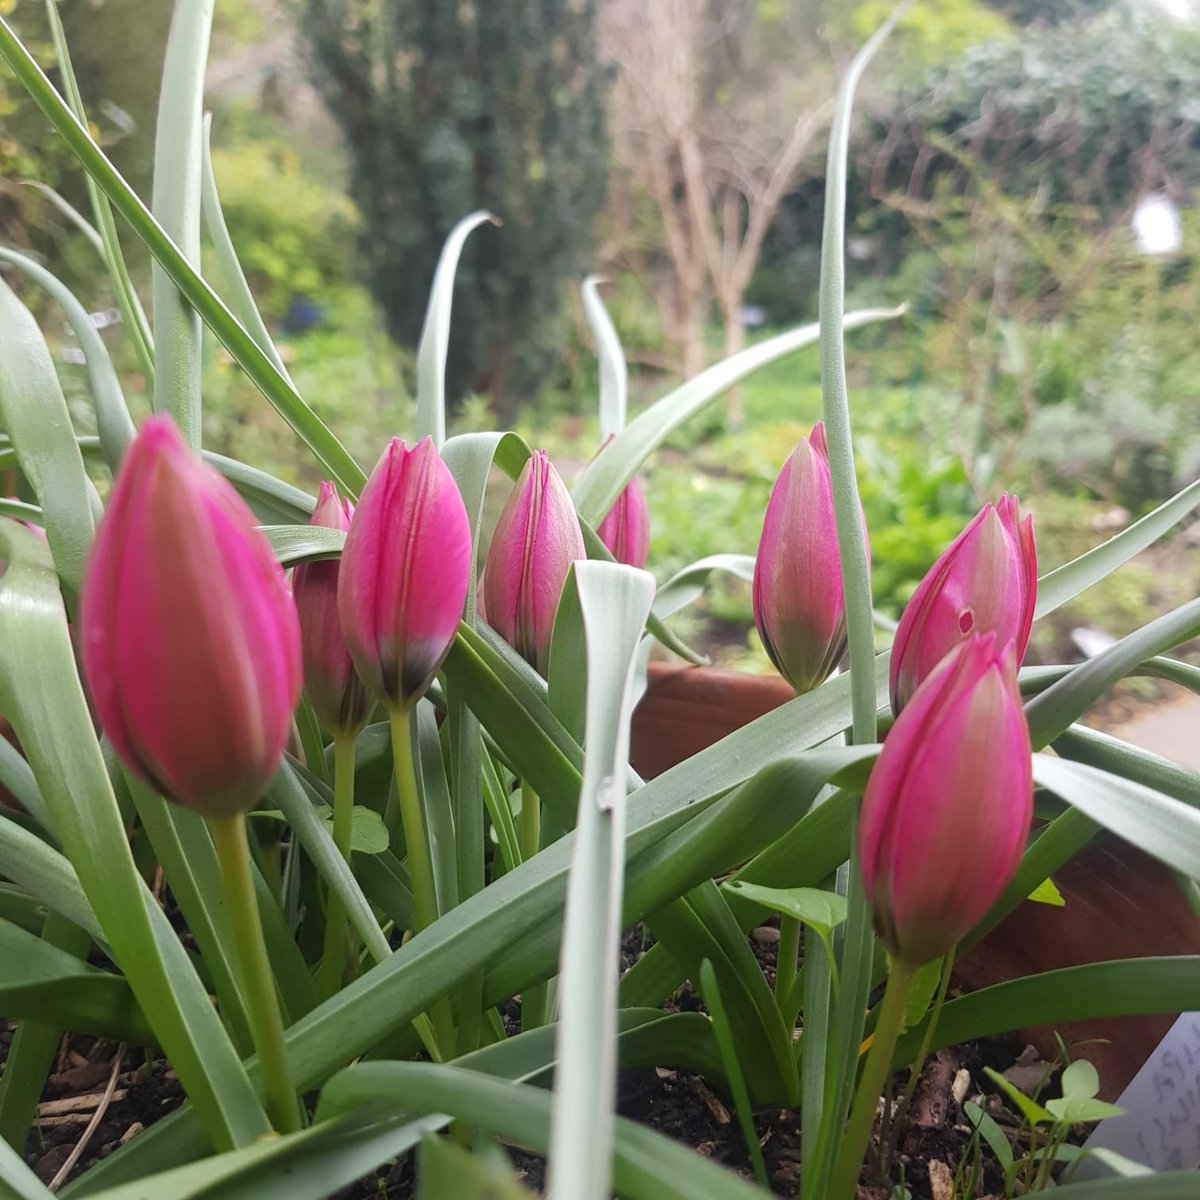 VISIT OUR GARDEN THIS SUNDAY
For the first time in over a year our botanic garden will be open to the public. This event is part of @NGSOpenGardens
Sunday 28th April 2pm – 5pm.
Book tickets: findagarden.ngs.org.uk/garden/8456/so…
We’re looking forward to having you back!
#SLBI #BotanicGarden